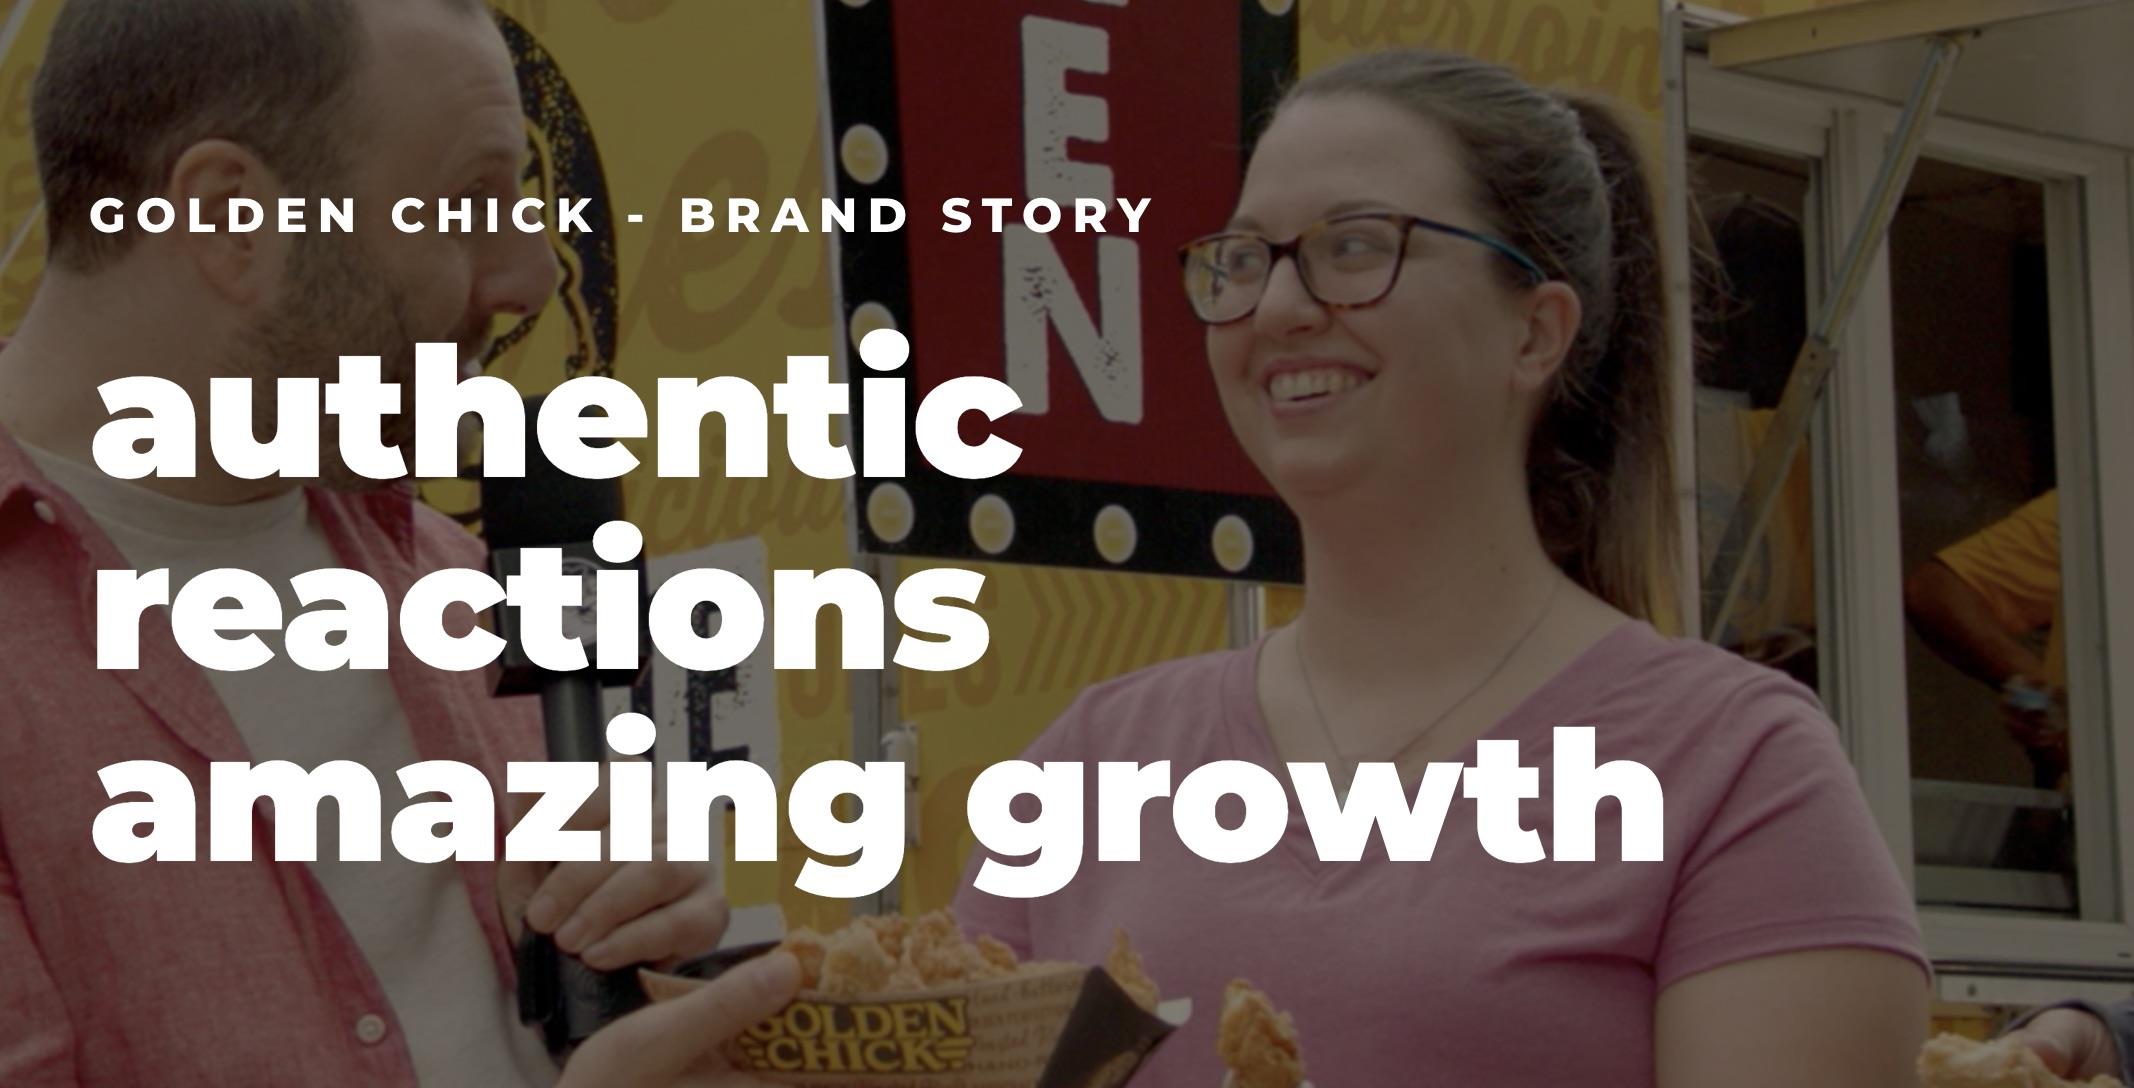 Golden Chick—Authentic reactions amazing growth